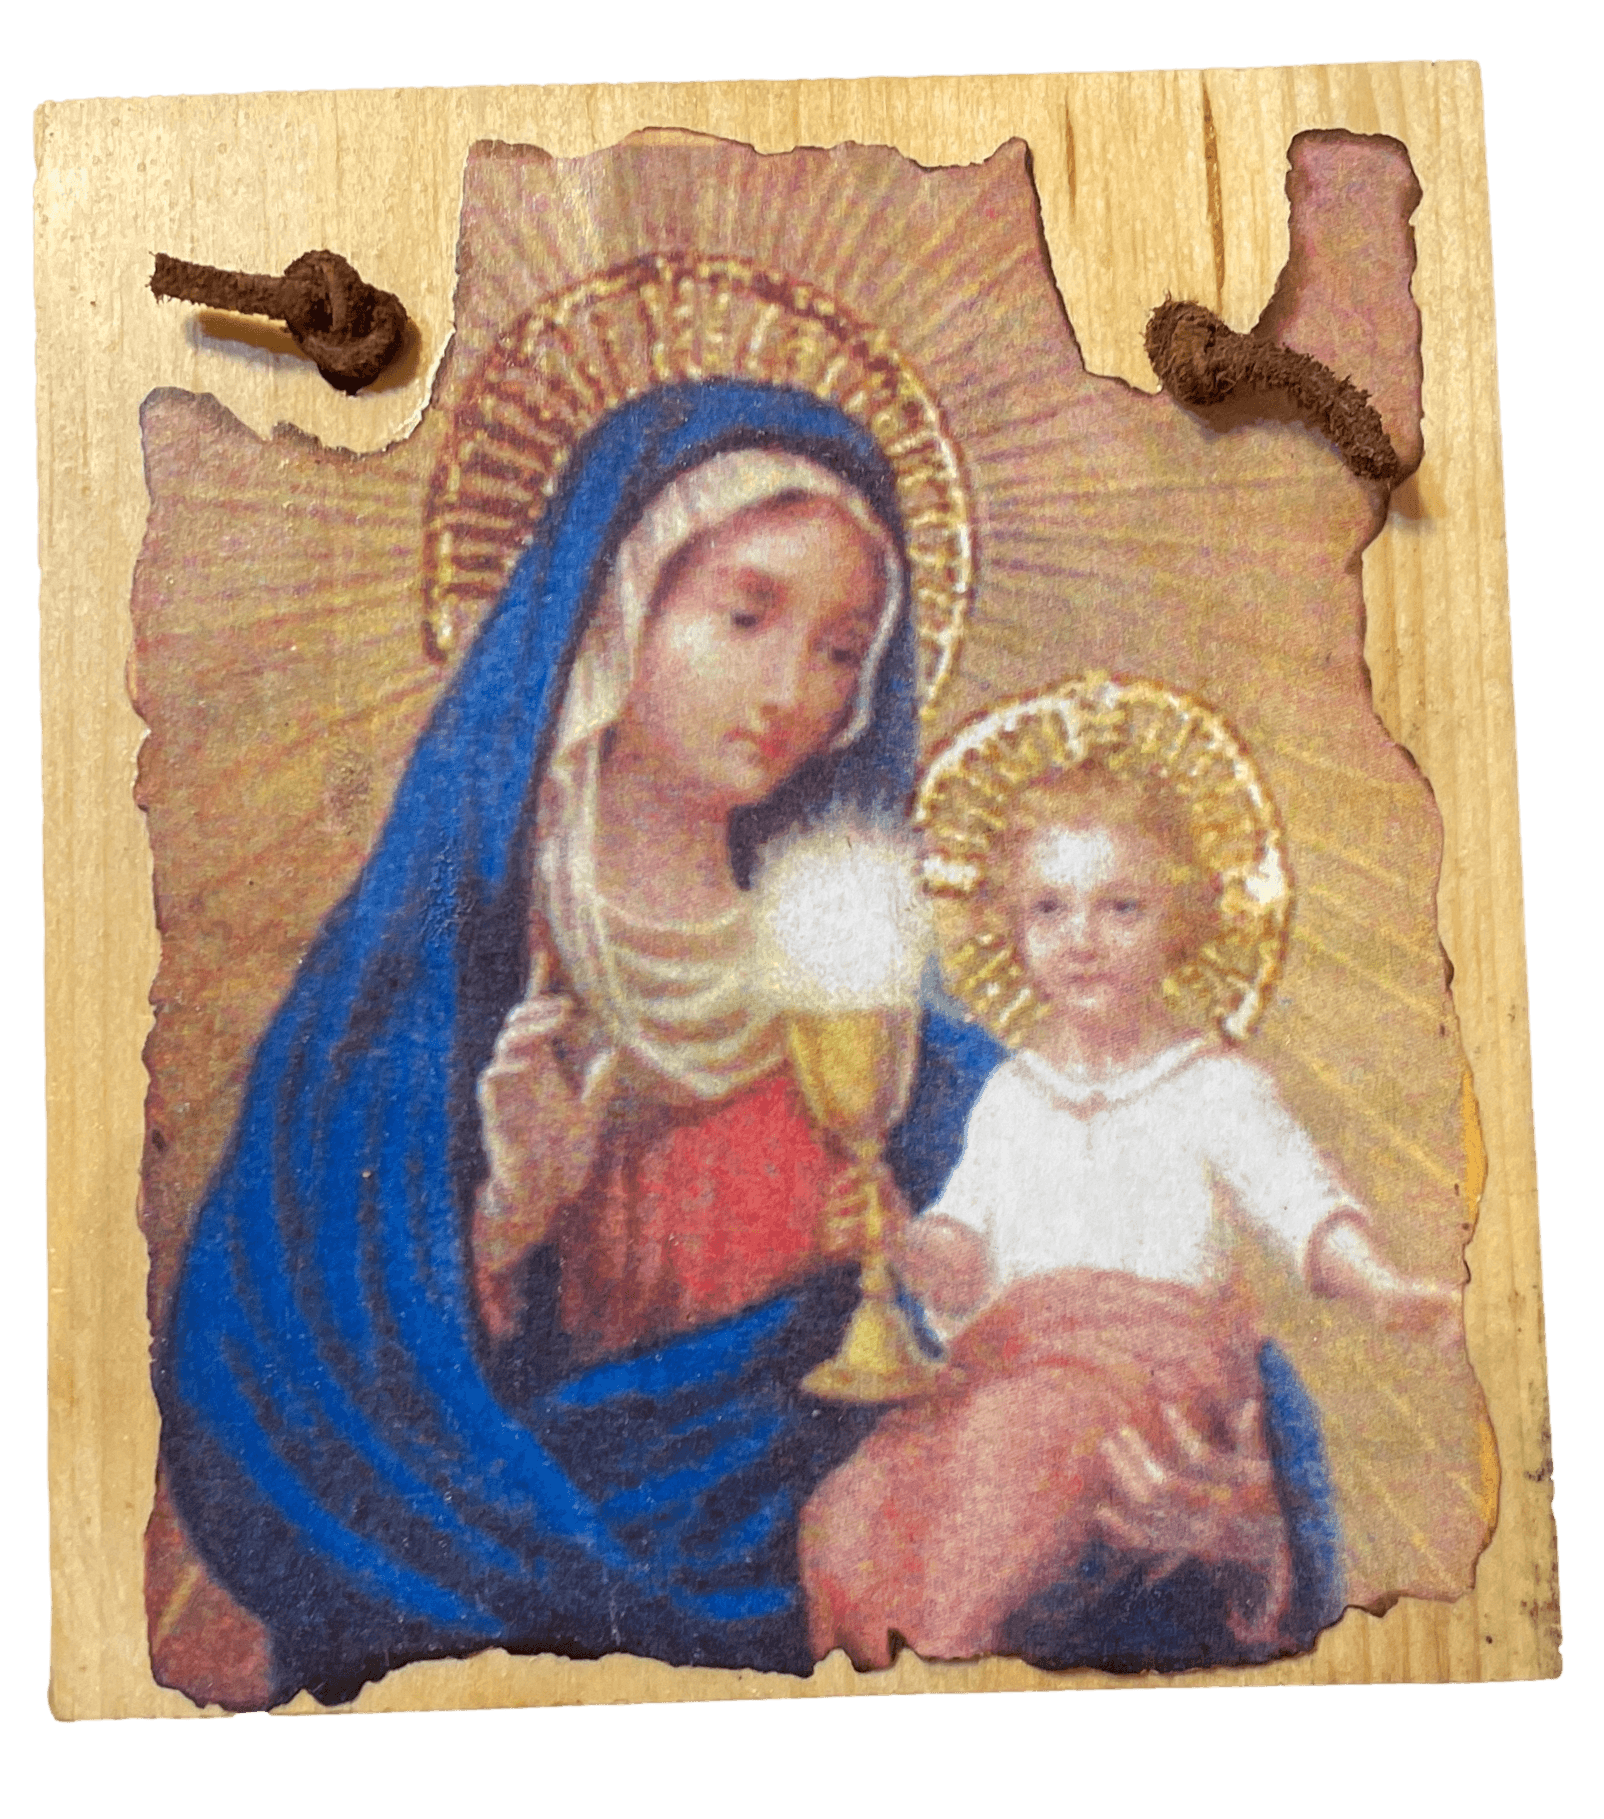 Retablo Wood Madonna & Child Chalice From Morada In Northern Taos County New Mexico By Artist D. Kelsey 1910 5.5" L x 5" W - Ysleta Mission Gift Shop- VOTED El Paso's Best Gift Shop